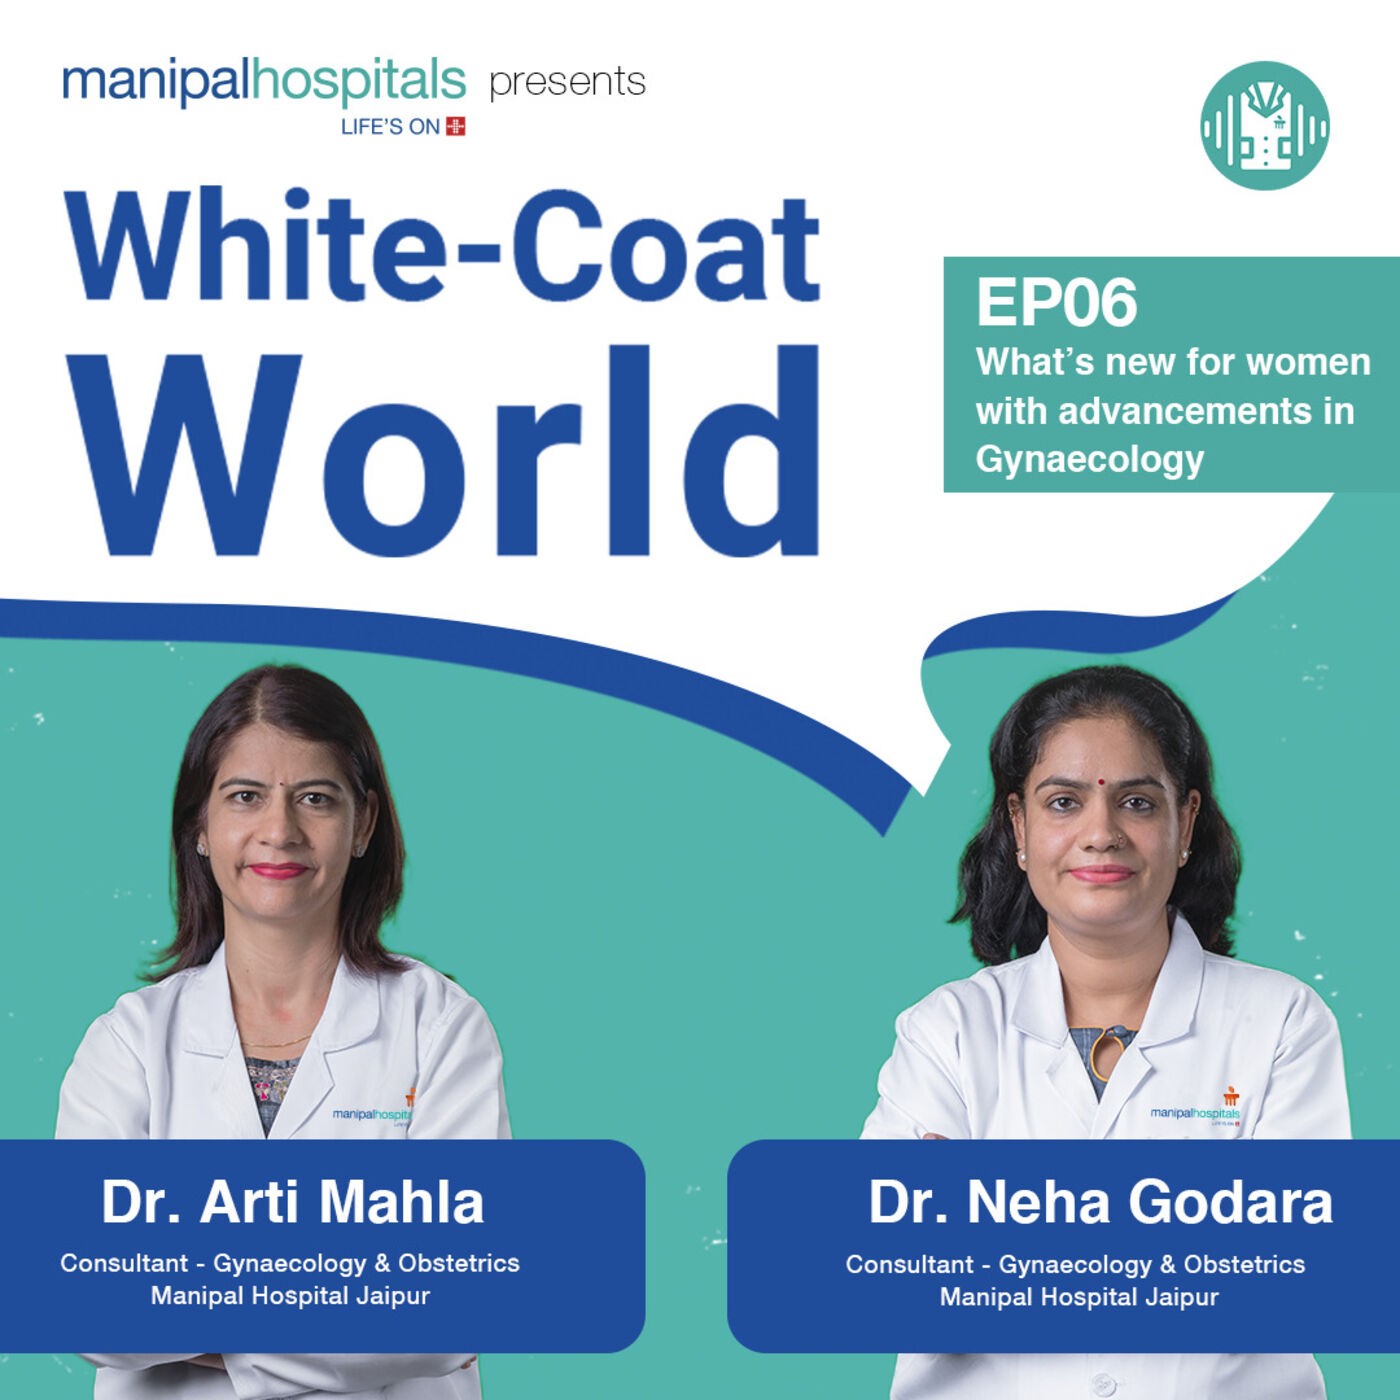 Advancements in Gynaecology - Dr. Arti Mahia Manipal Hospitals